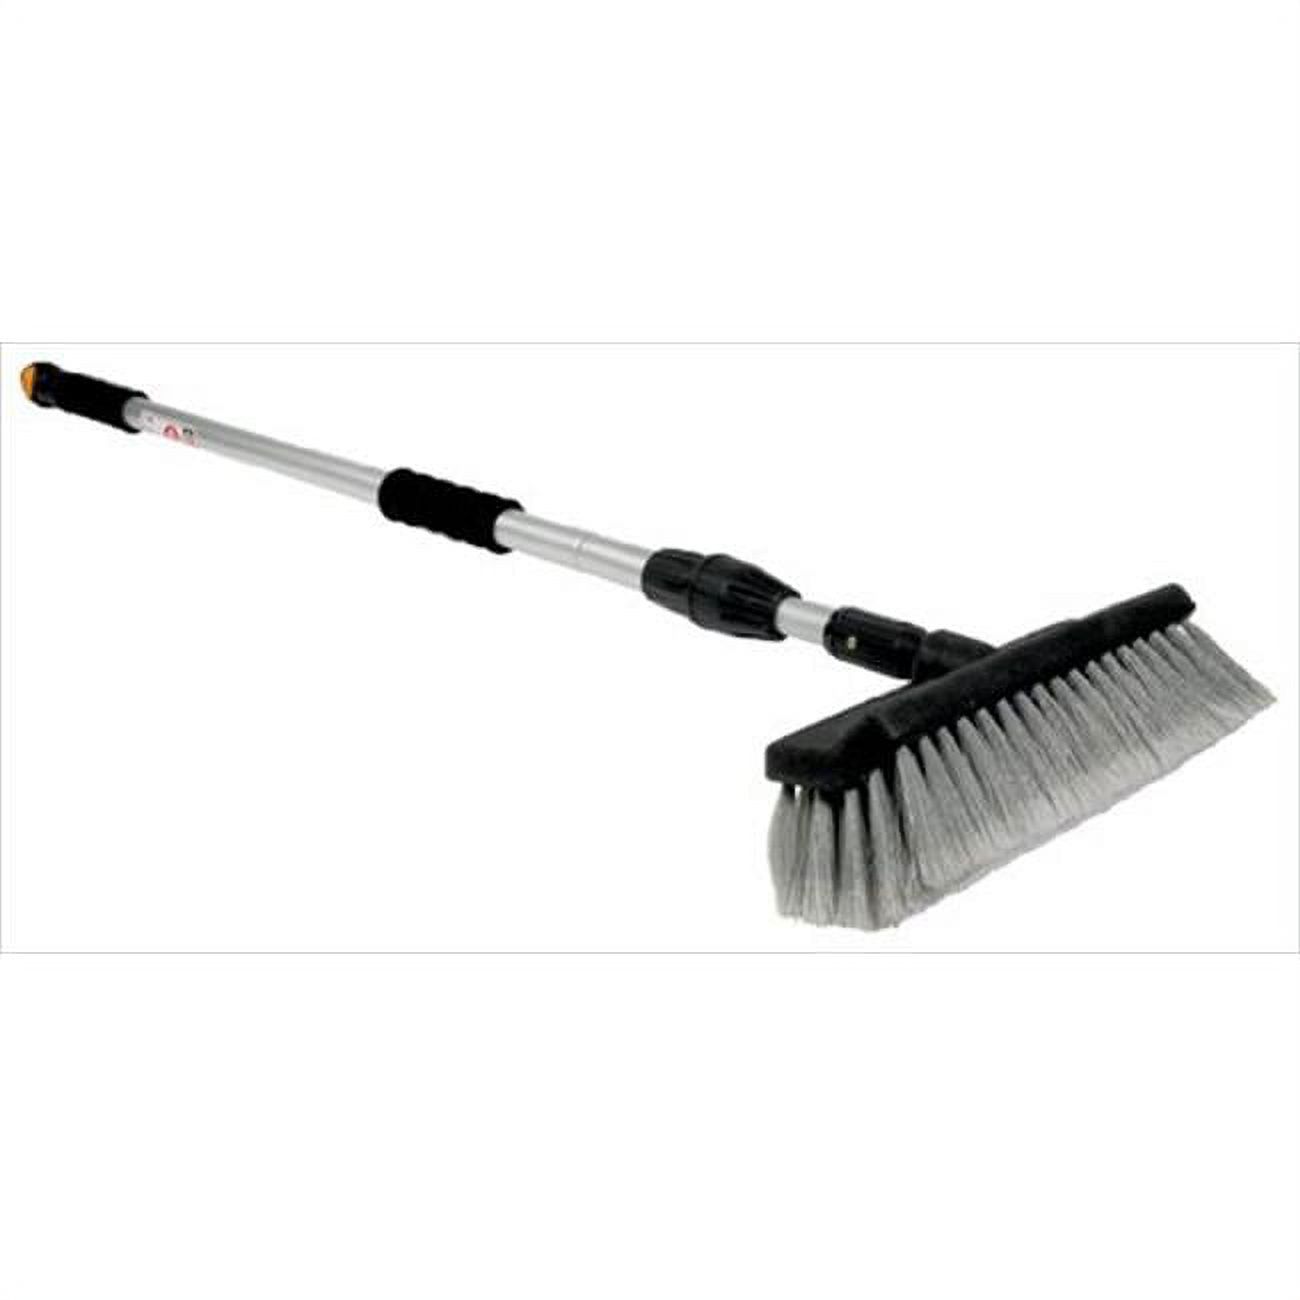 Camco  RV Flow-Through Wash Brush with Adjustable Handle, Adjusts from 43-inches to 71-inches Long, Black and Silver (43633) - image 1 of 13